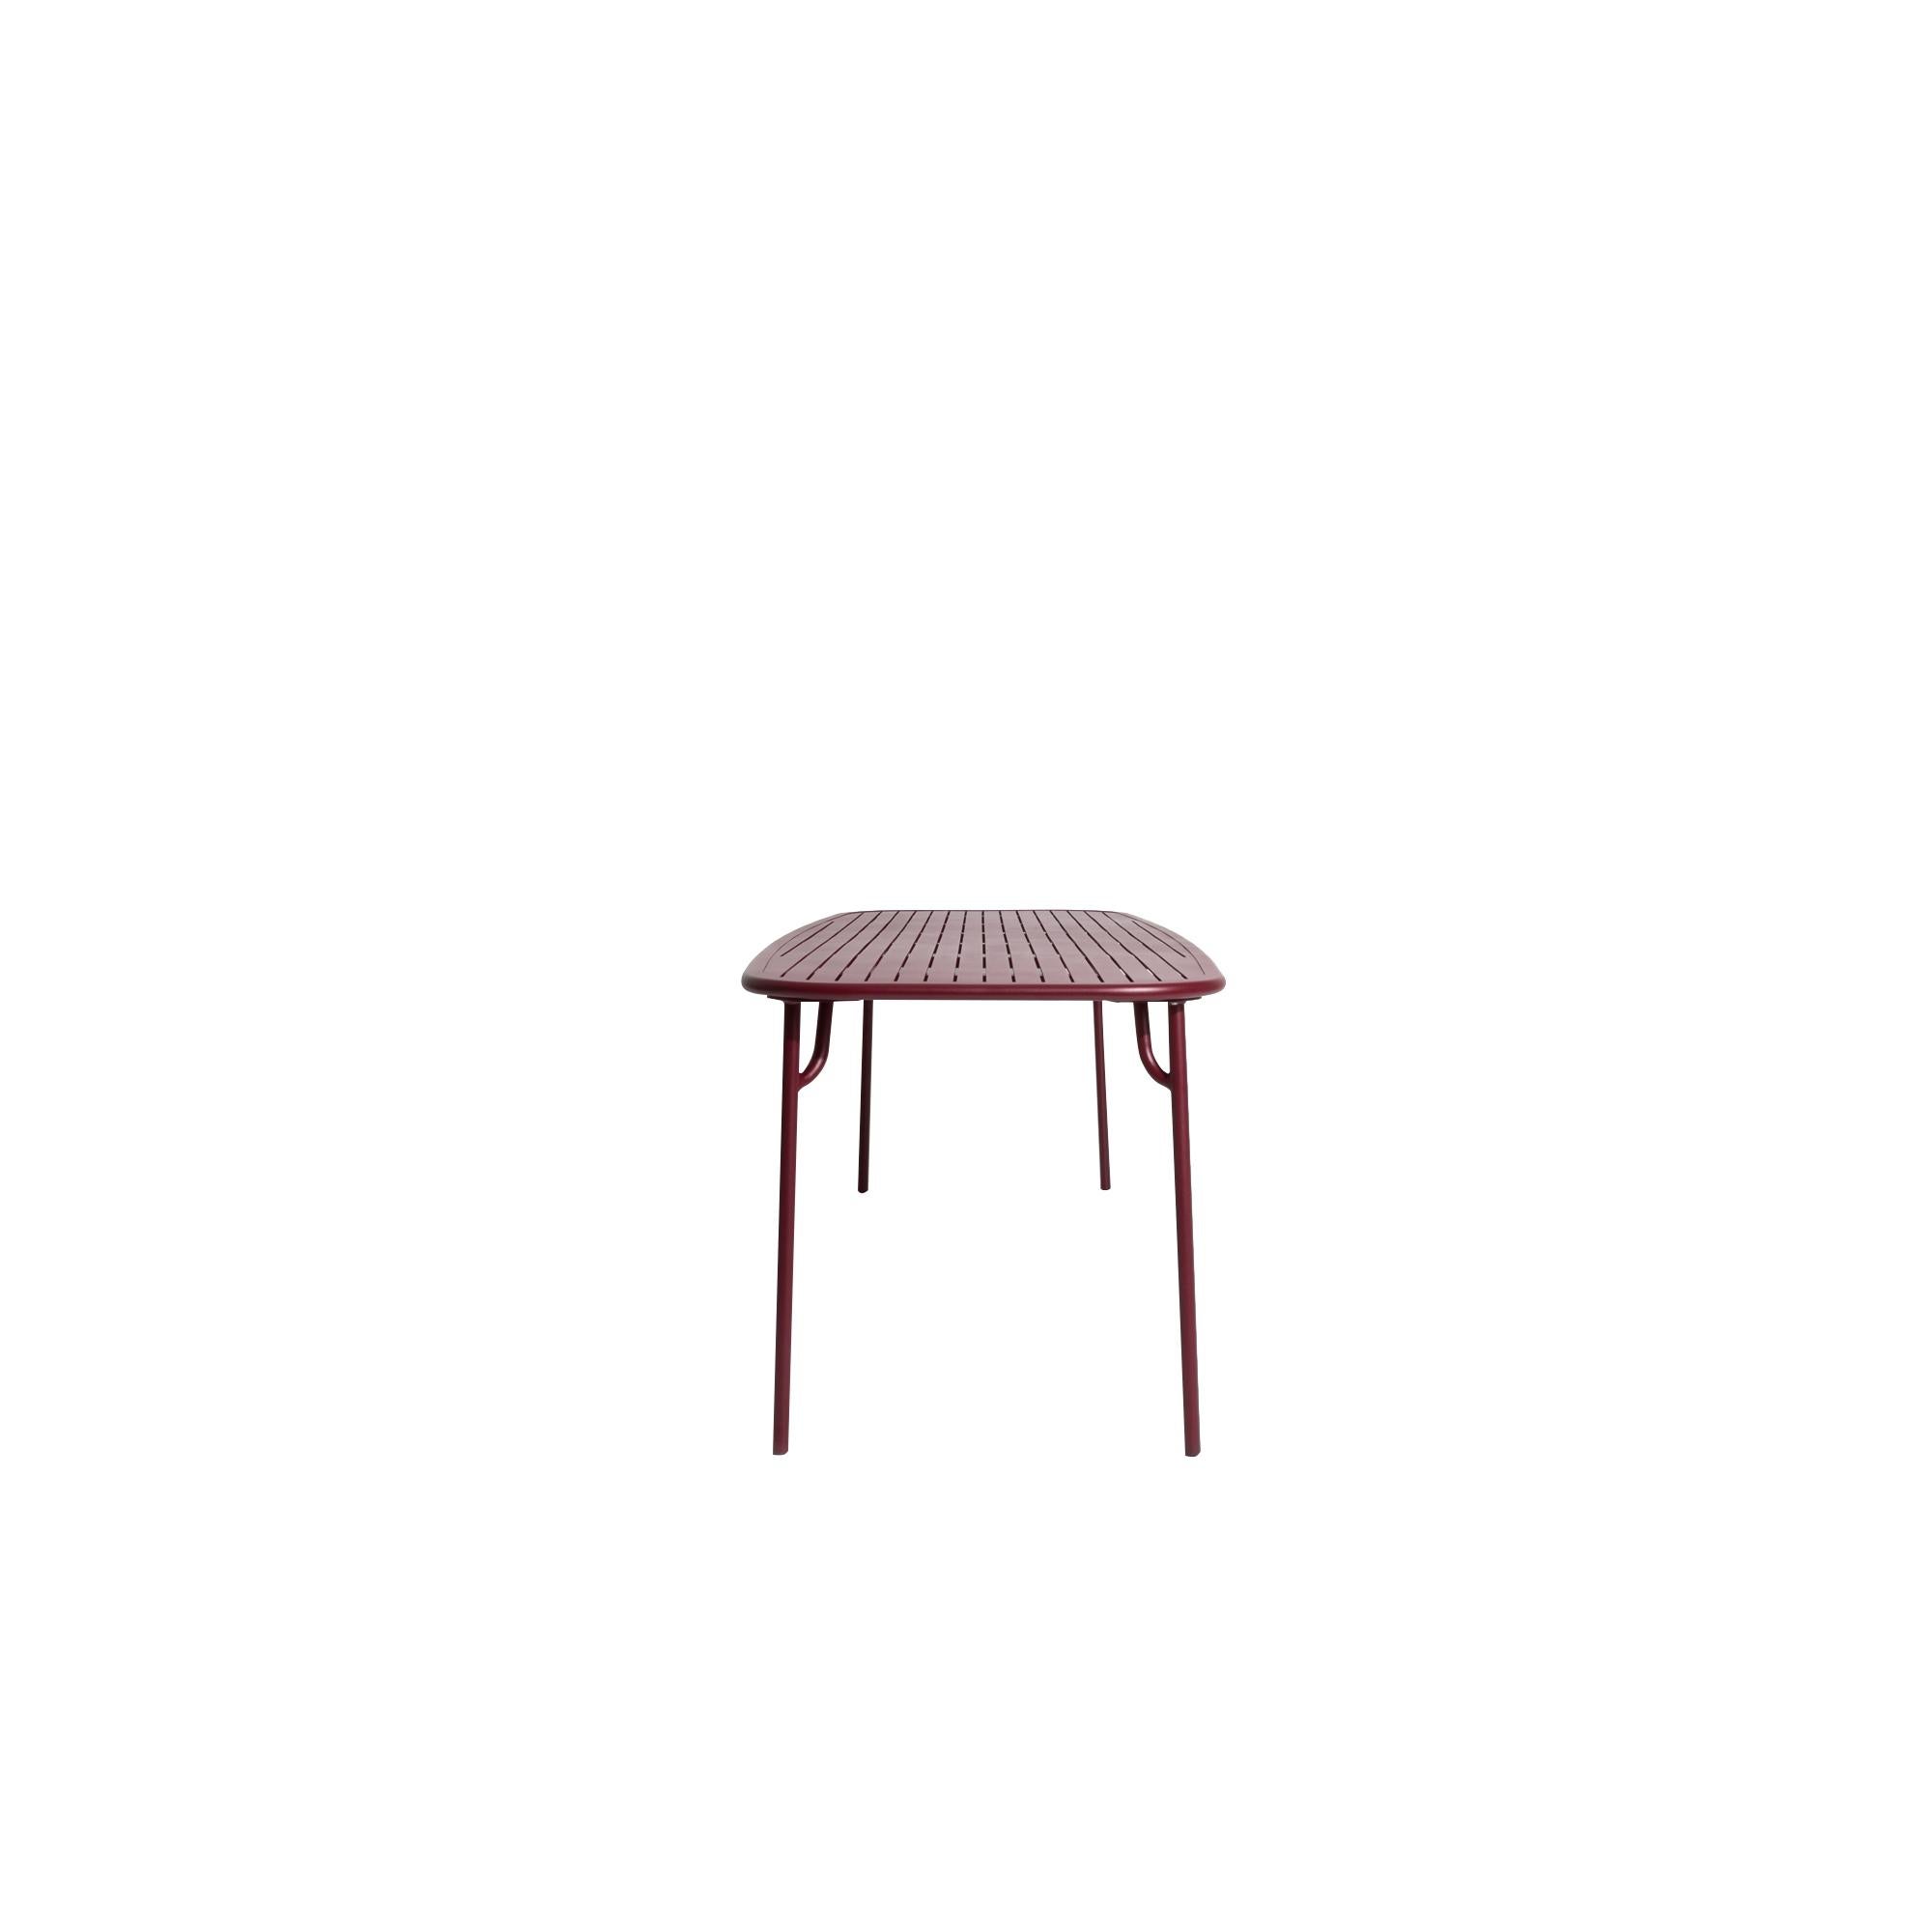 Chinese Petite Friture Week-End Large Rectangular Dining Table in Burgundy with Slats  For Sale